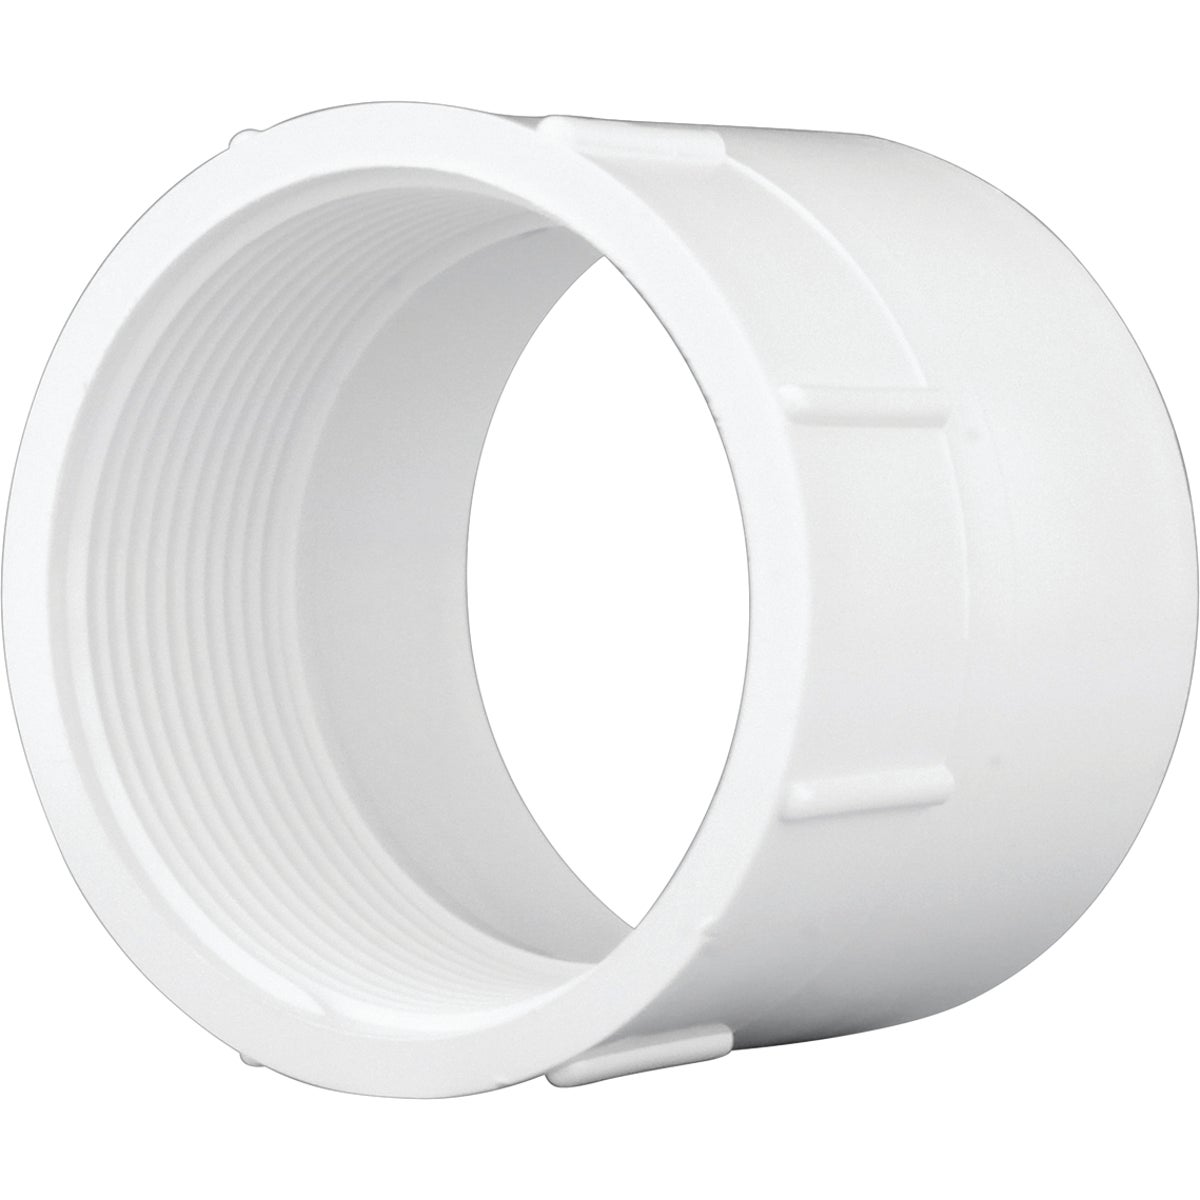 Charlotte Pipe 6 In. Hub x 6 In. FPT Schedule 40 DWV PVC Adapter